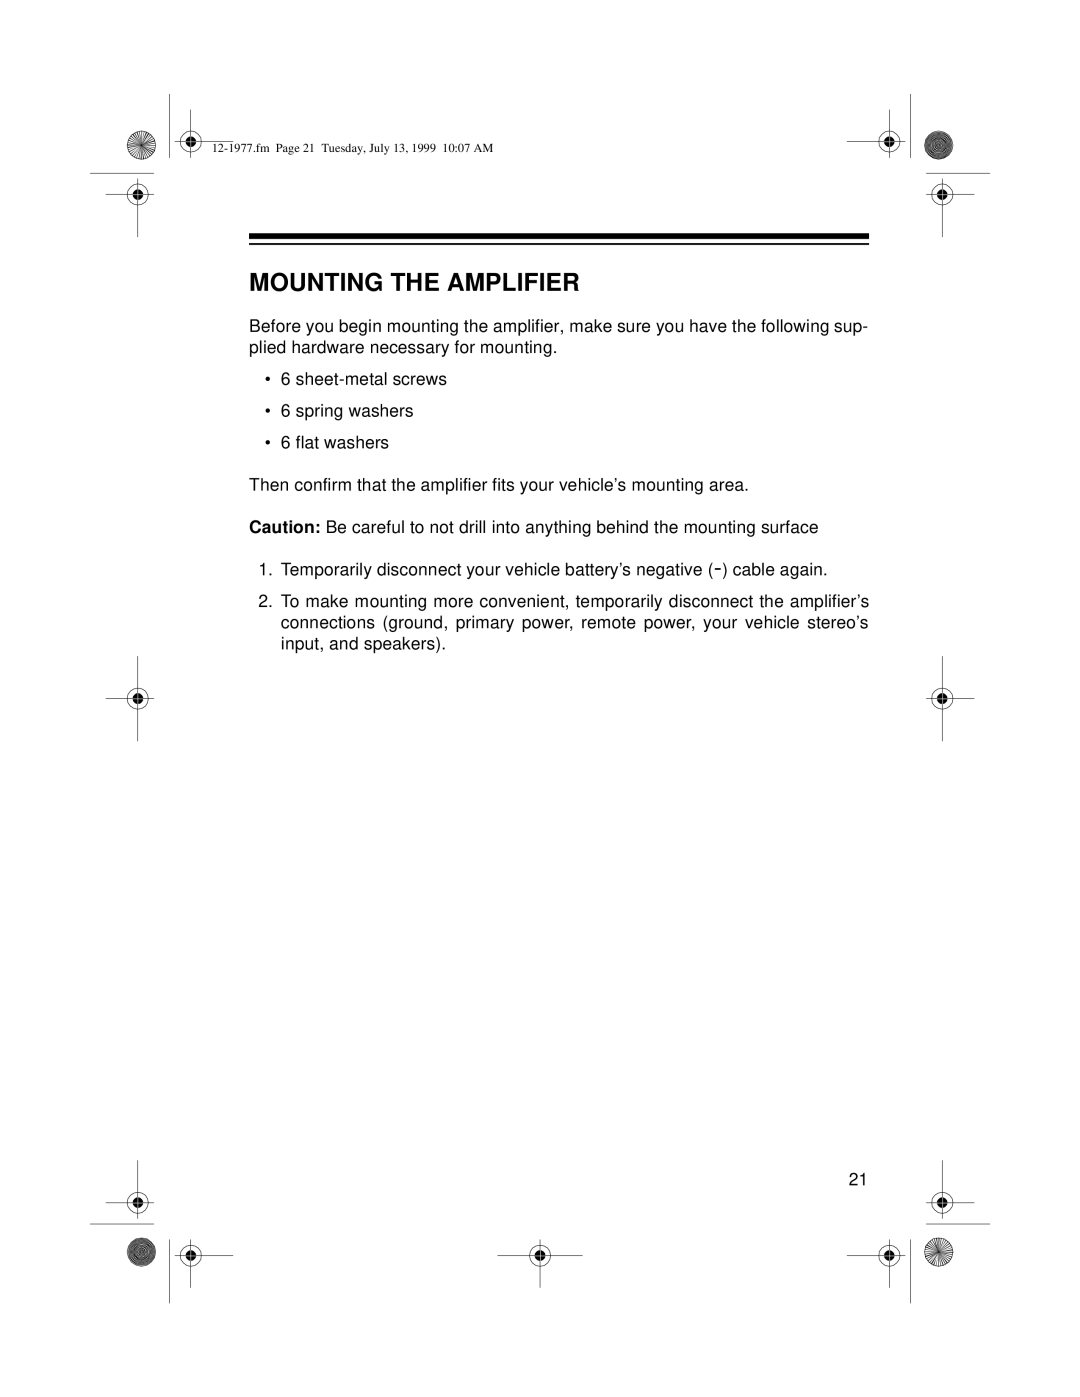 Radio Shack 85 owner manual Mounting The Amplifier 